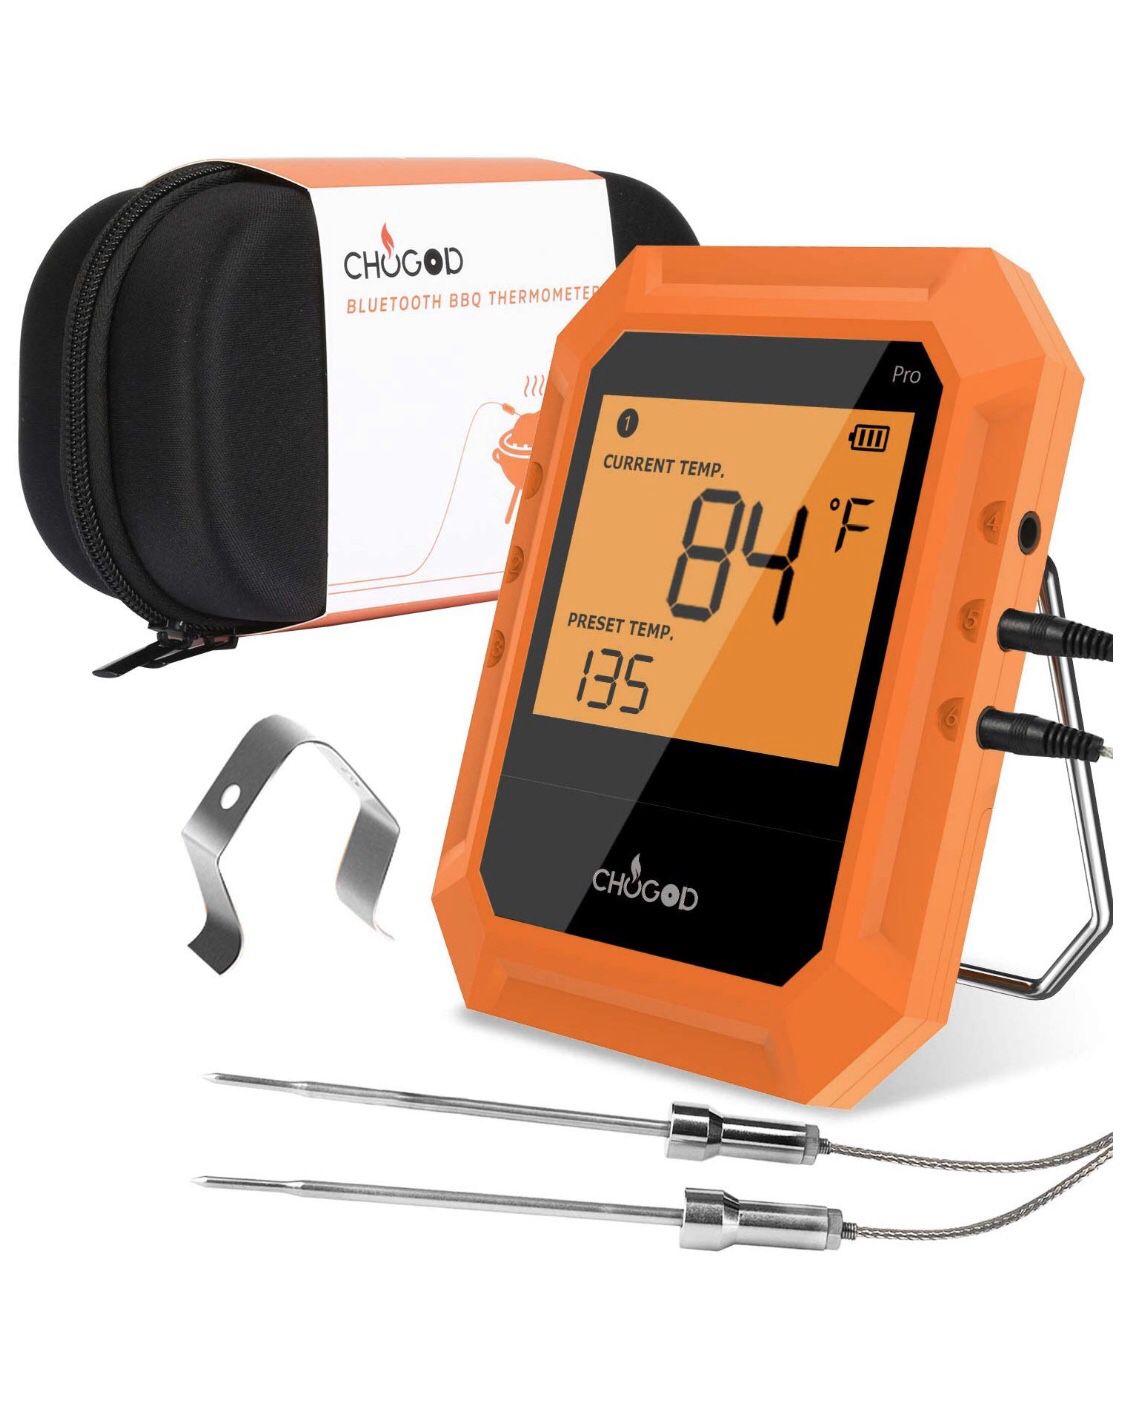 Brand new! BBQ Meat Thermometer, Bluetooth Remote Cooking Thermometer, Digital Oven Thermometer with 6 Probe Port for Smoker Grilling (Carrying Case